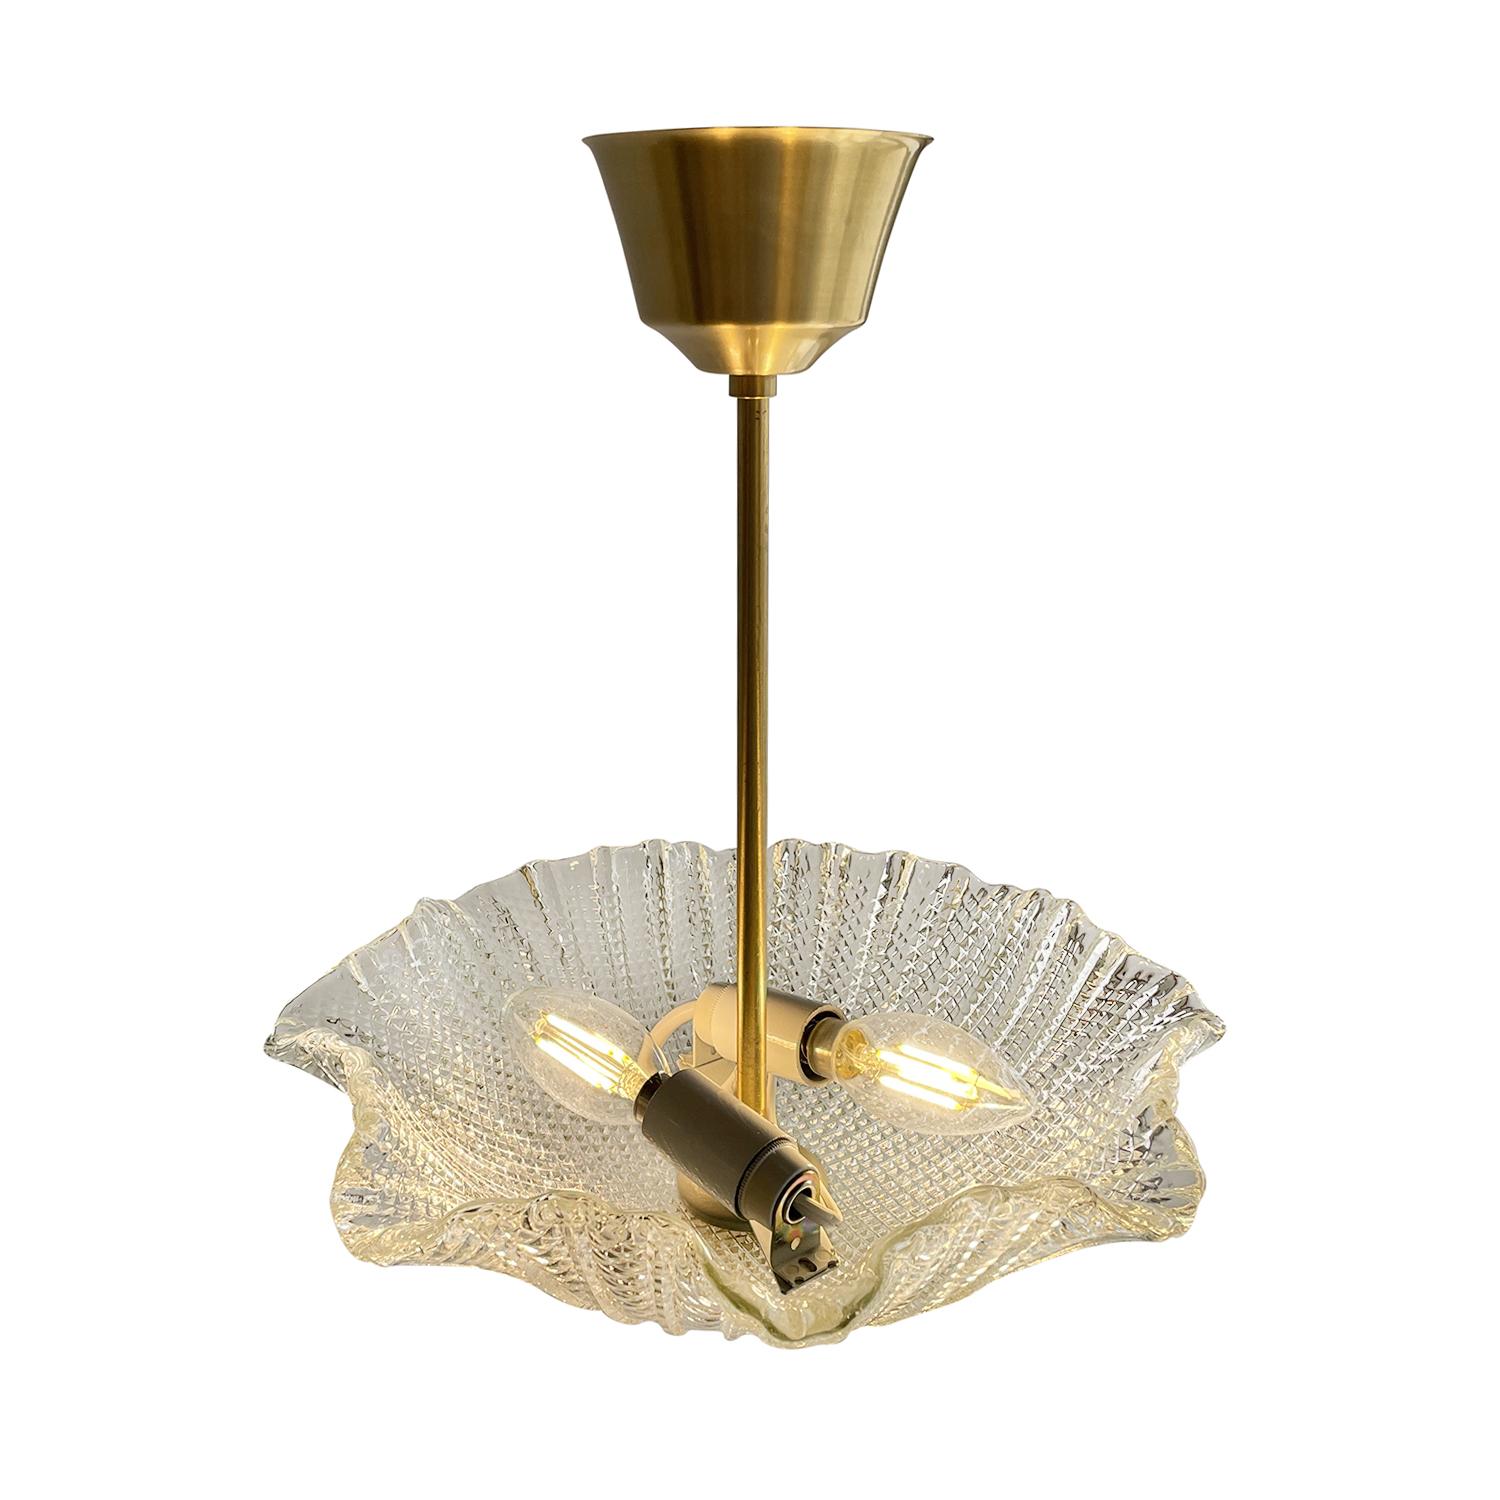 Metal 20th Century Swedish Smoked Glass Ceiling Light, Lamp Attributed to Orrefors For Sale